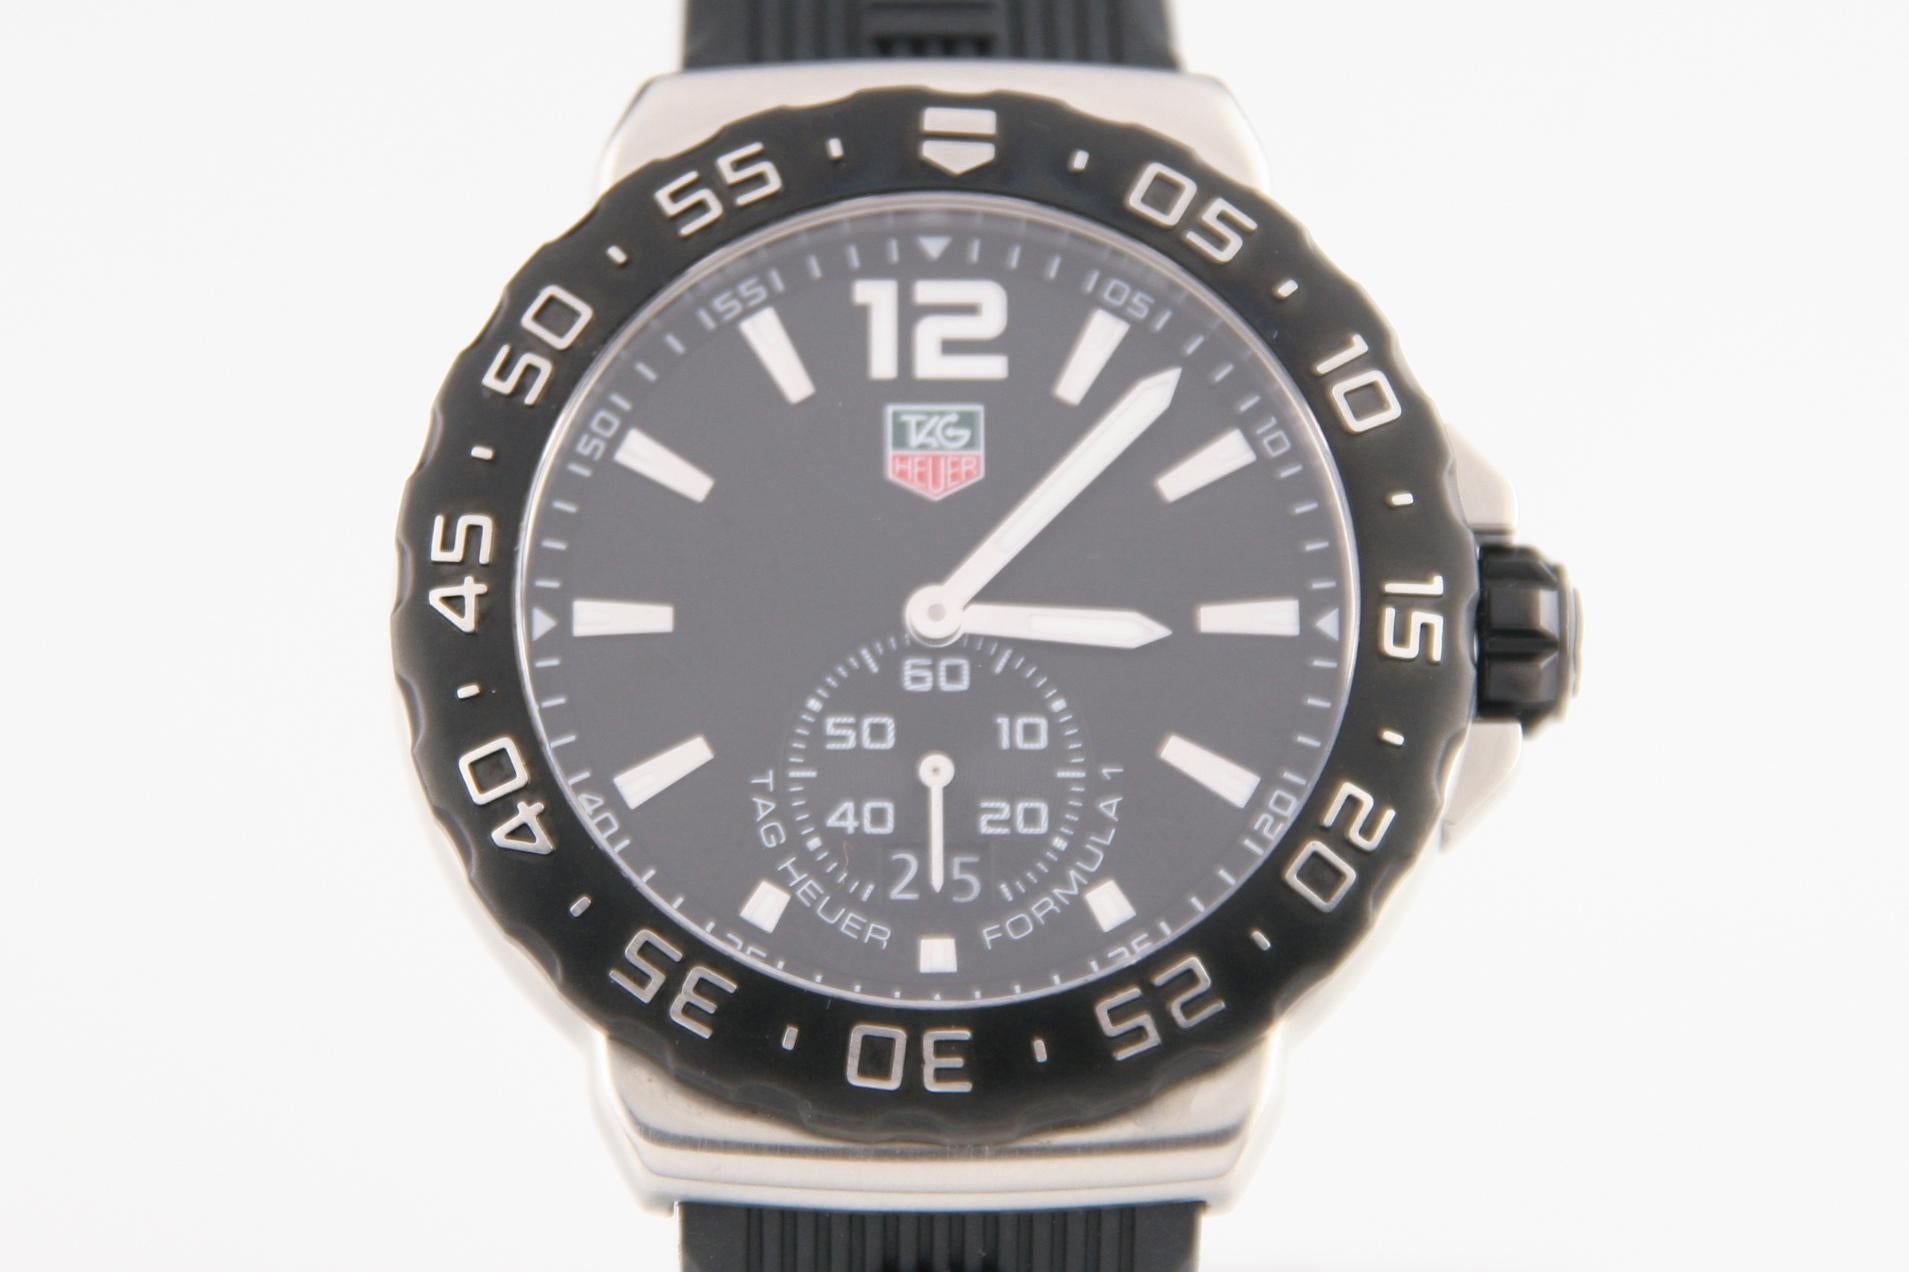 Tag Heuer Men's Formula Quartz Watch w/ Rubber Tag Heuer Band WAU-1110
Model: Formula
Model #WAU-1110
Serial #RPN0940
Brushed Stainless Steel Case w/ Black-Coated Steel Bezel
41 mm in Diameter (45 mm w/ Crown)
Lug-to-Lug Distance = 43 mm
Thickness =